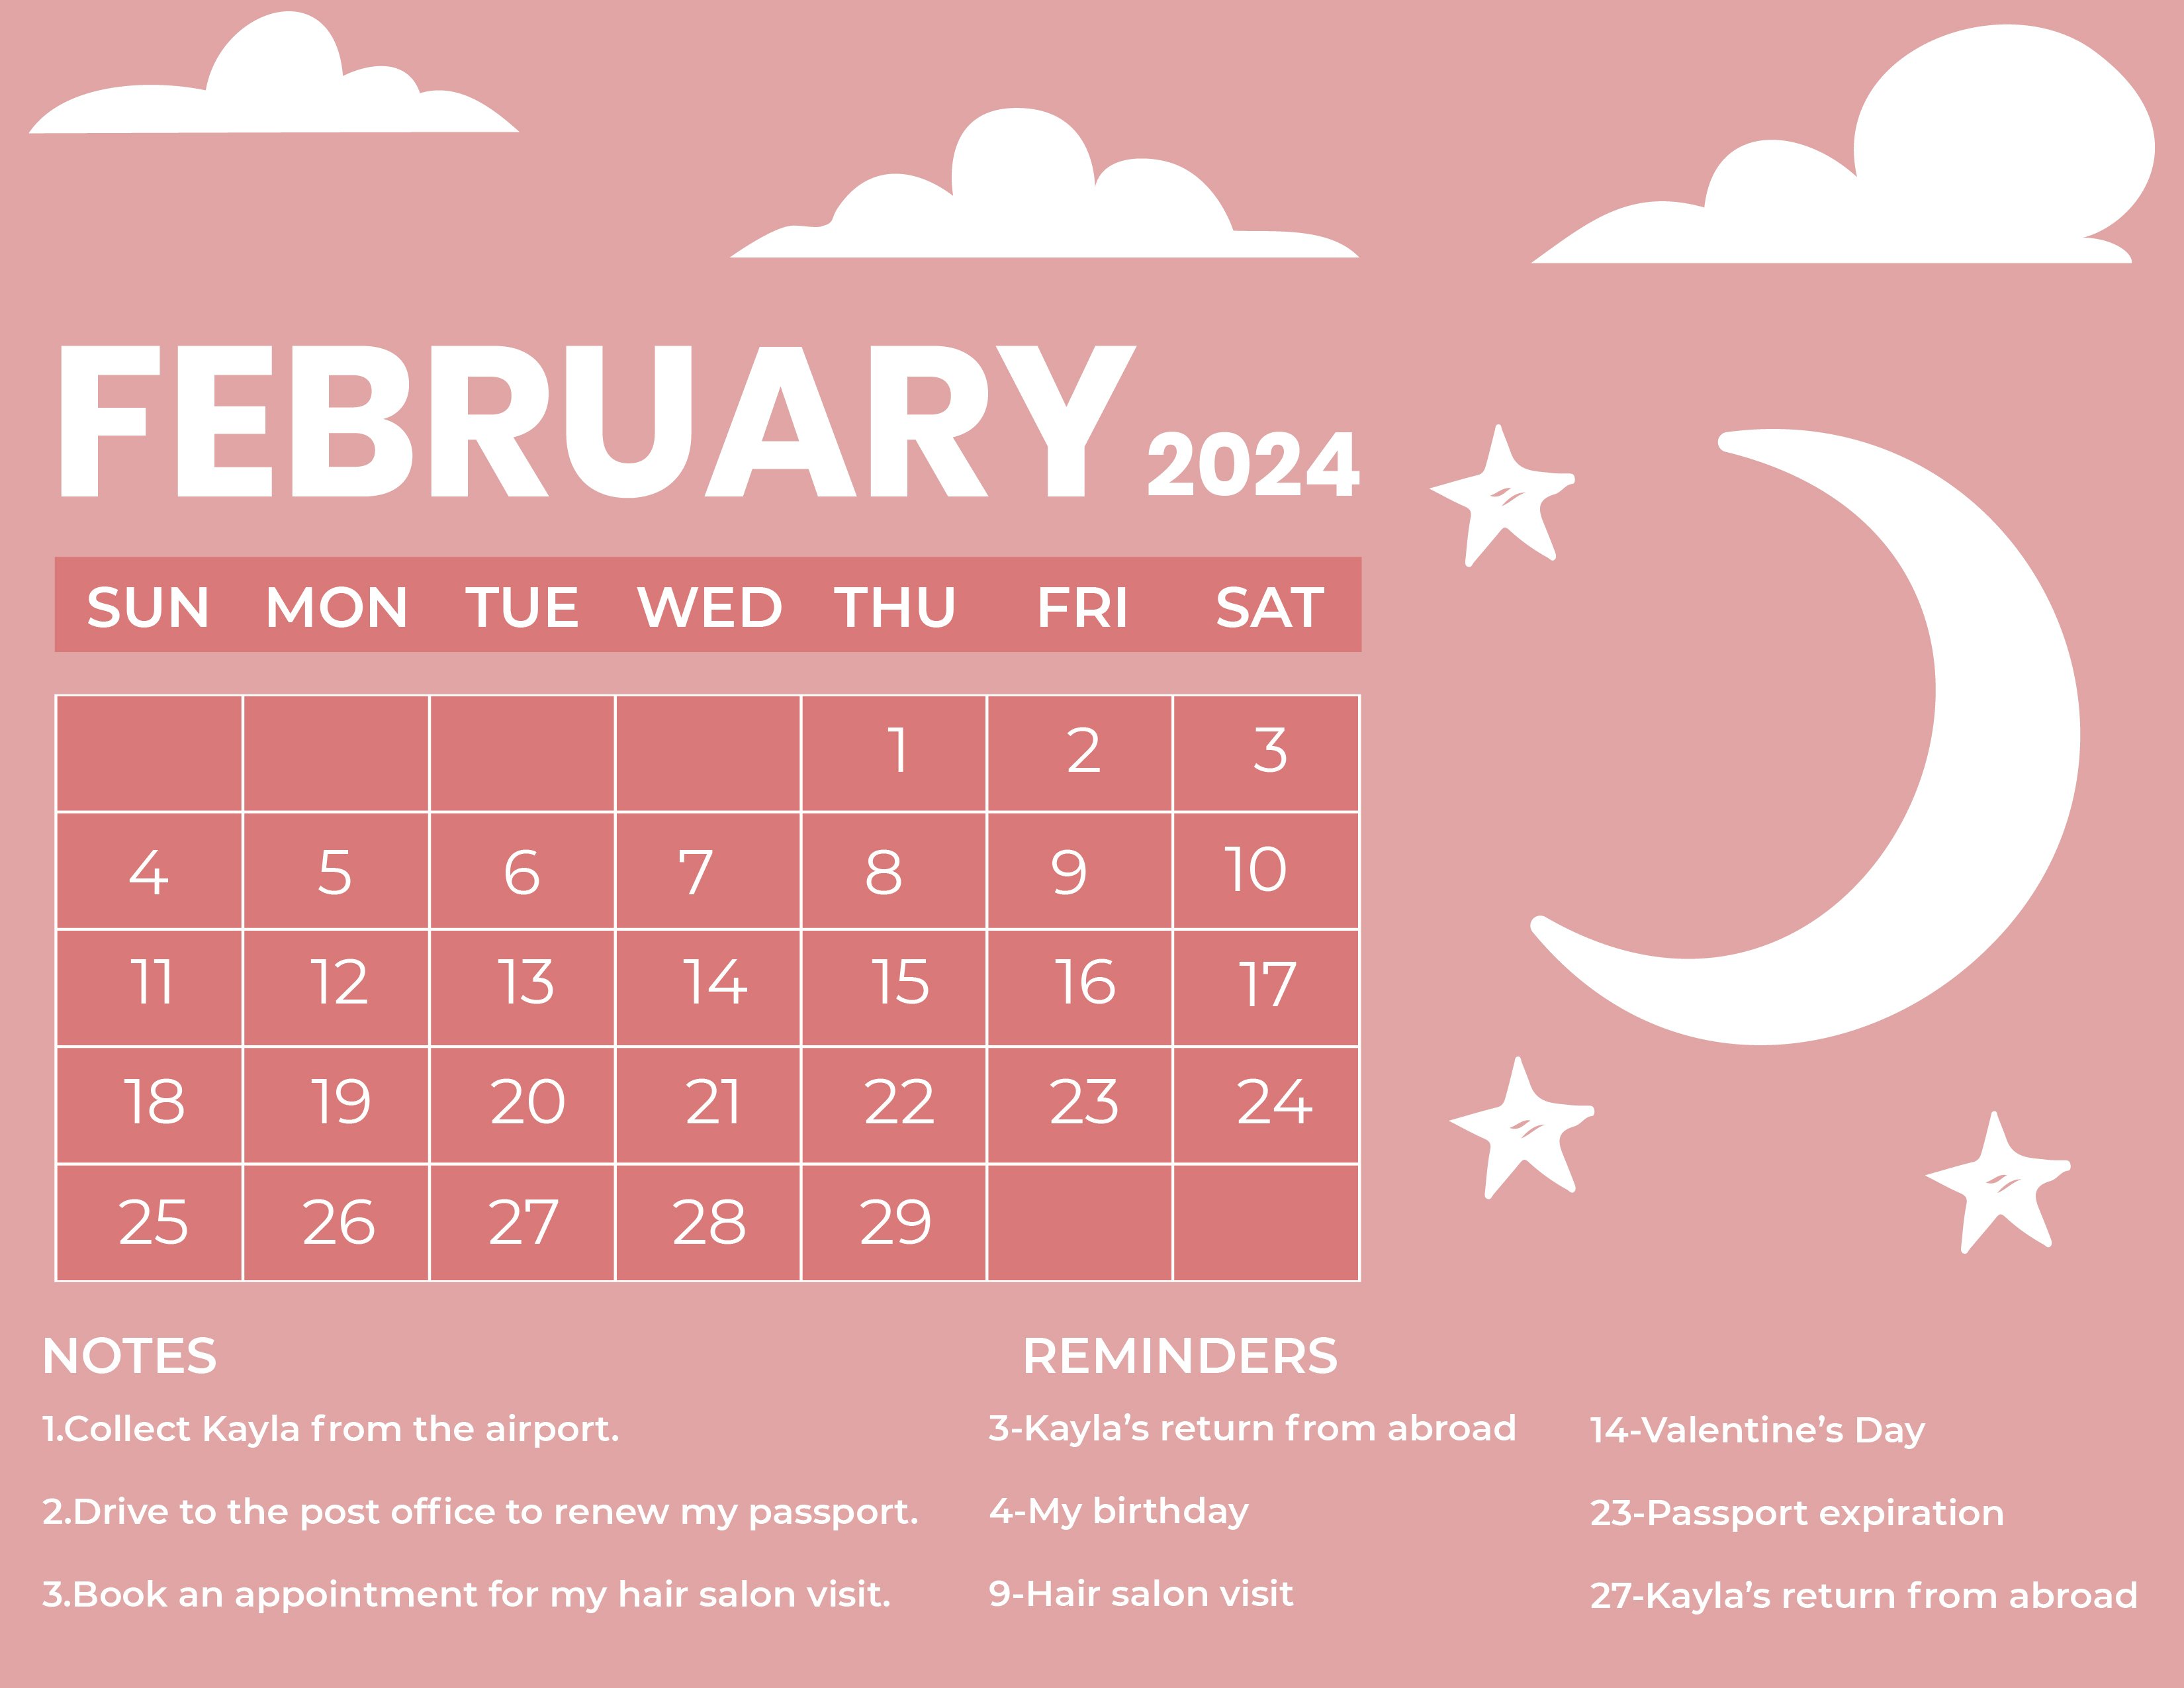 february-has-days-than-january-2024-new-ultimate-awesome-famous-february-valentine-day-2024